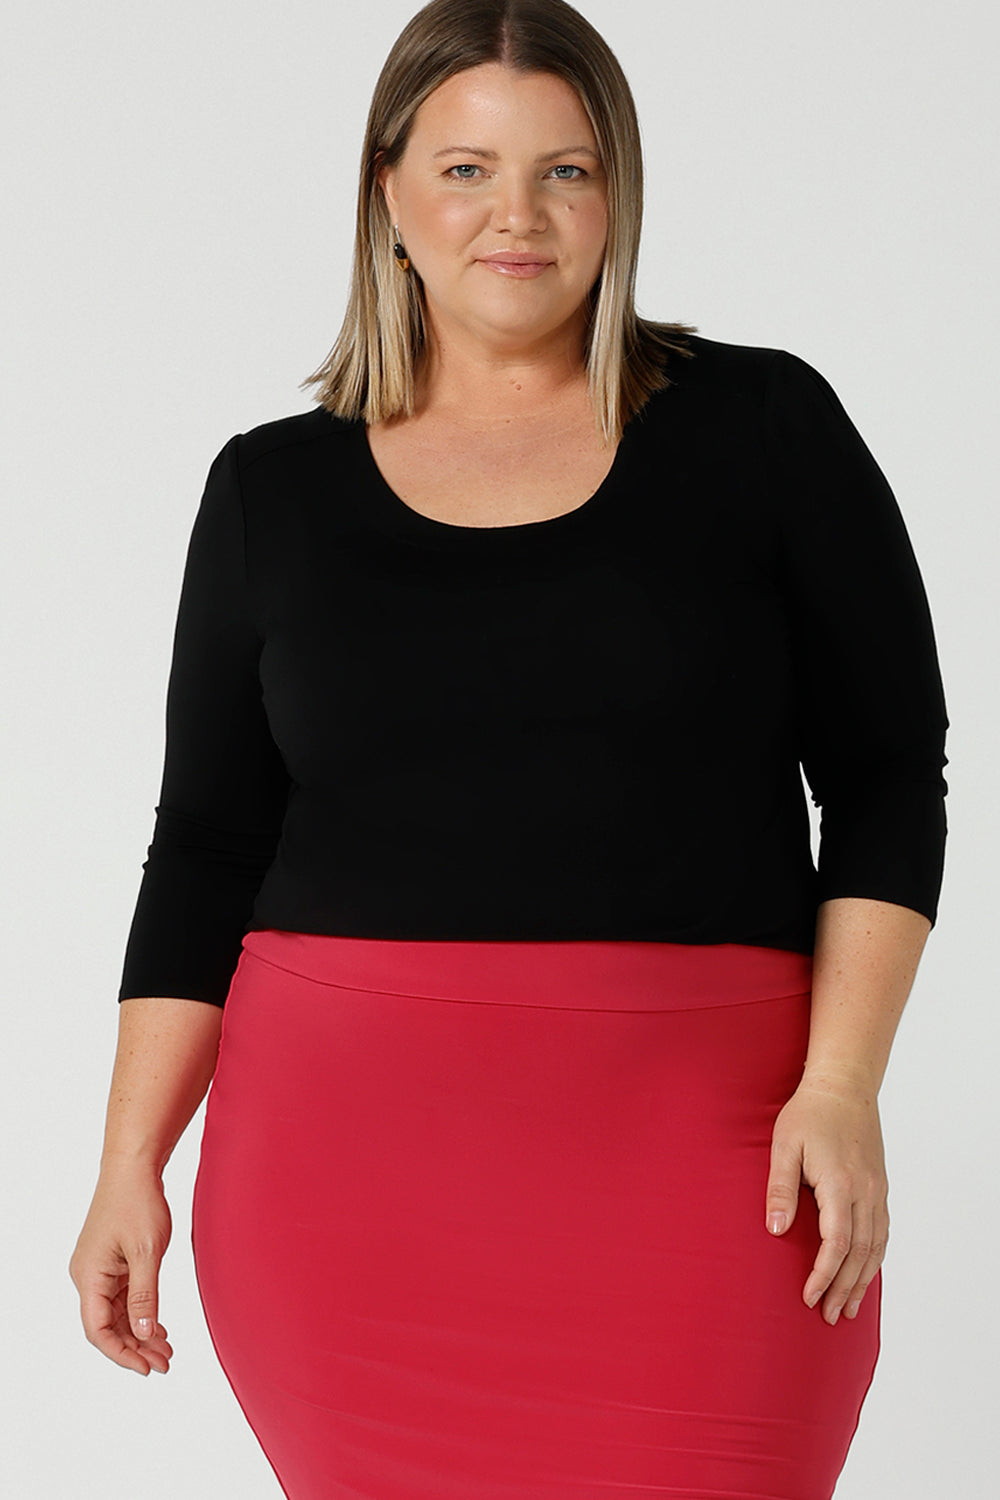 Jules in black bamboo with a scoop neckline and 3/4 sleeve. In soft black bamboo, this top is the perfect corporate casual workwear top. Designed and made in Australia for Leina & Fleur sizes 8 - 24. Styled on a curvy size 18 woman. 